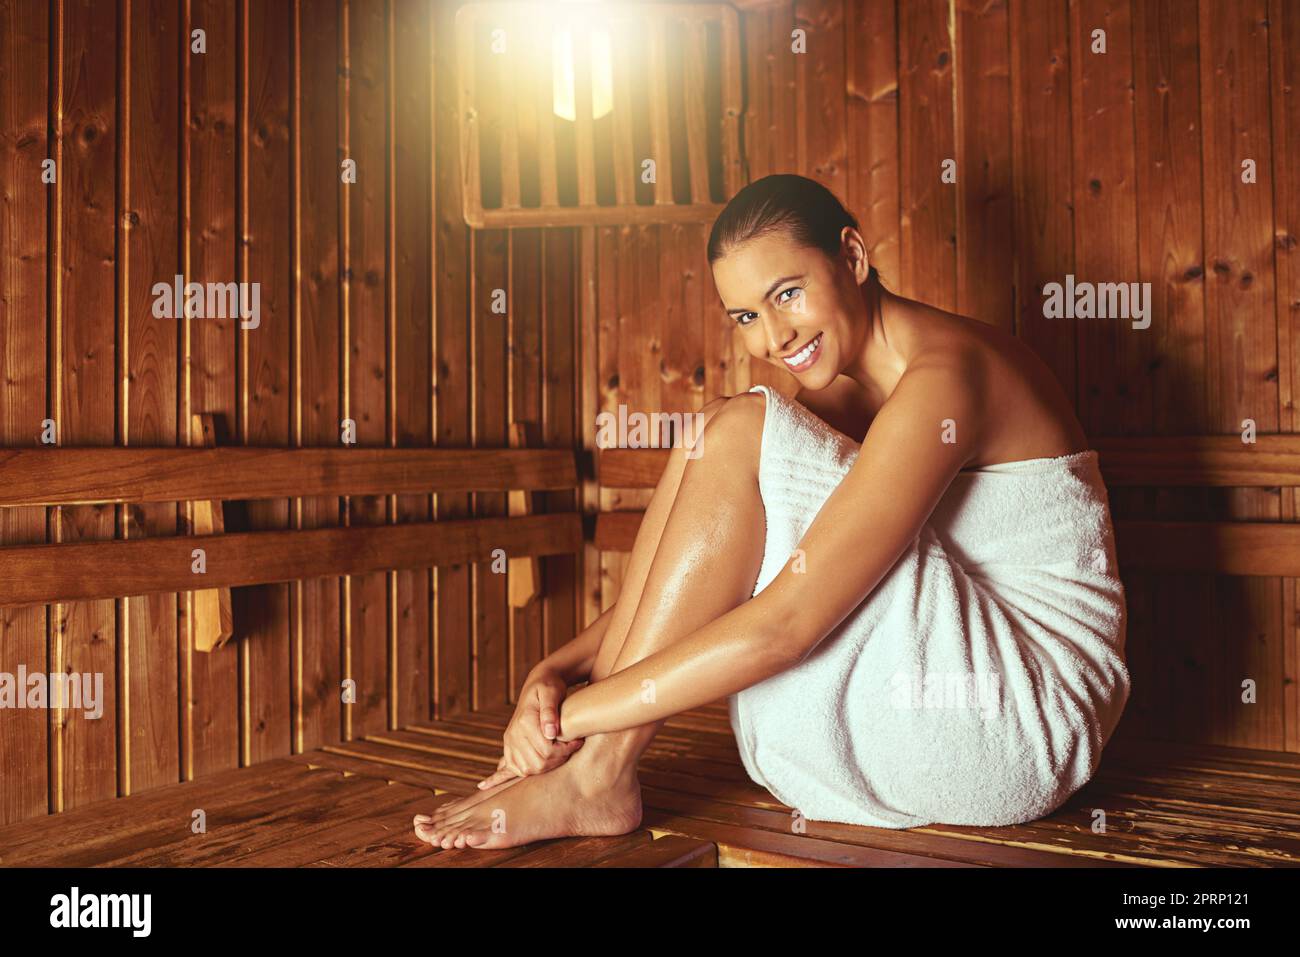 Surrendering to serenity. Full length portrait of a young woman relaxing in the sauna at a spa. Stock Photo